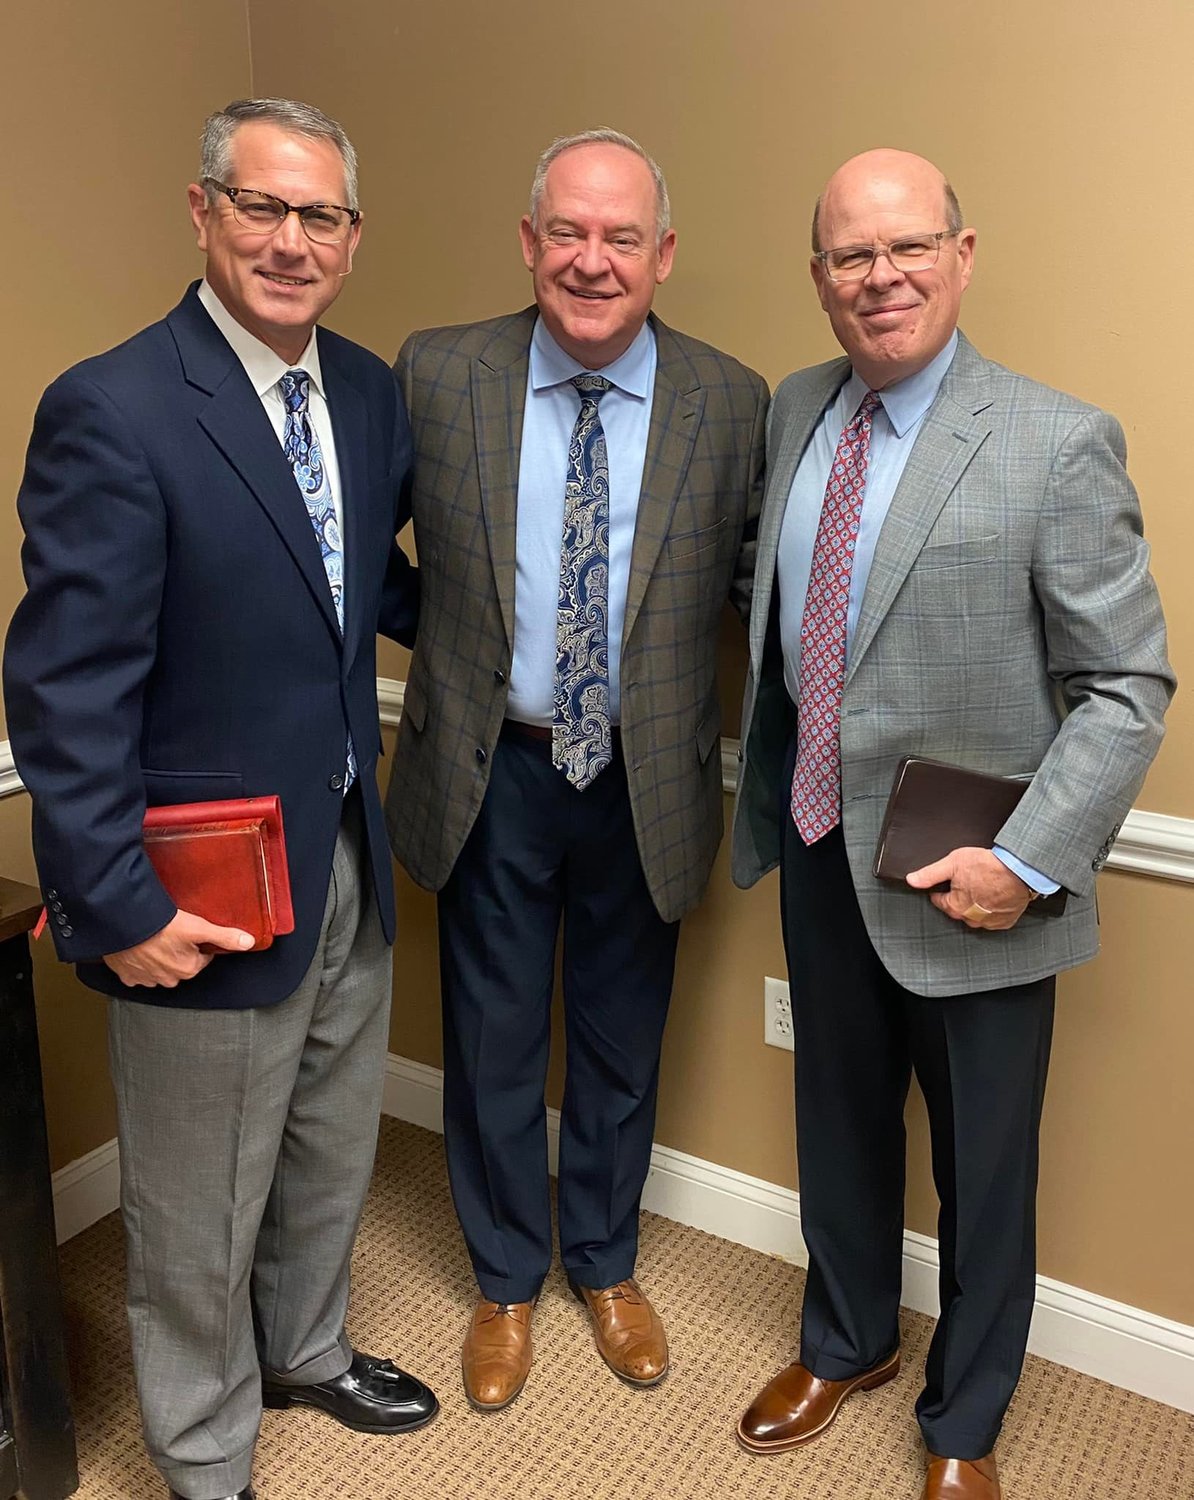 Pastor Brad Waters, left, and Evangelist Rick Coram, right, stand with Robby Foster, pastor of Northside Baptist Church in Valdosta. All three preached at the church's recent Bible conference.